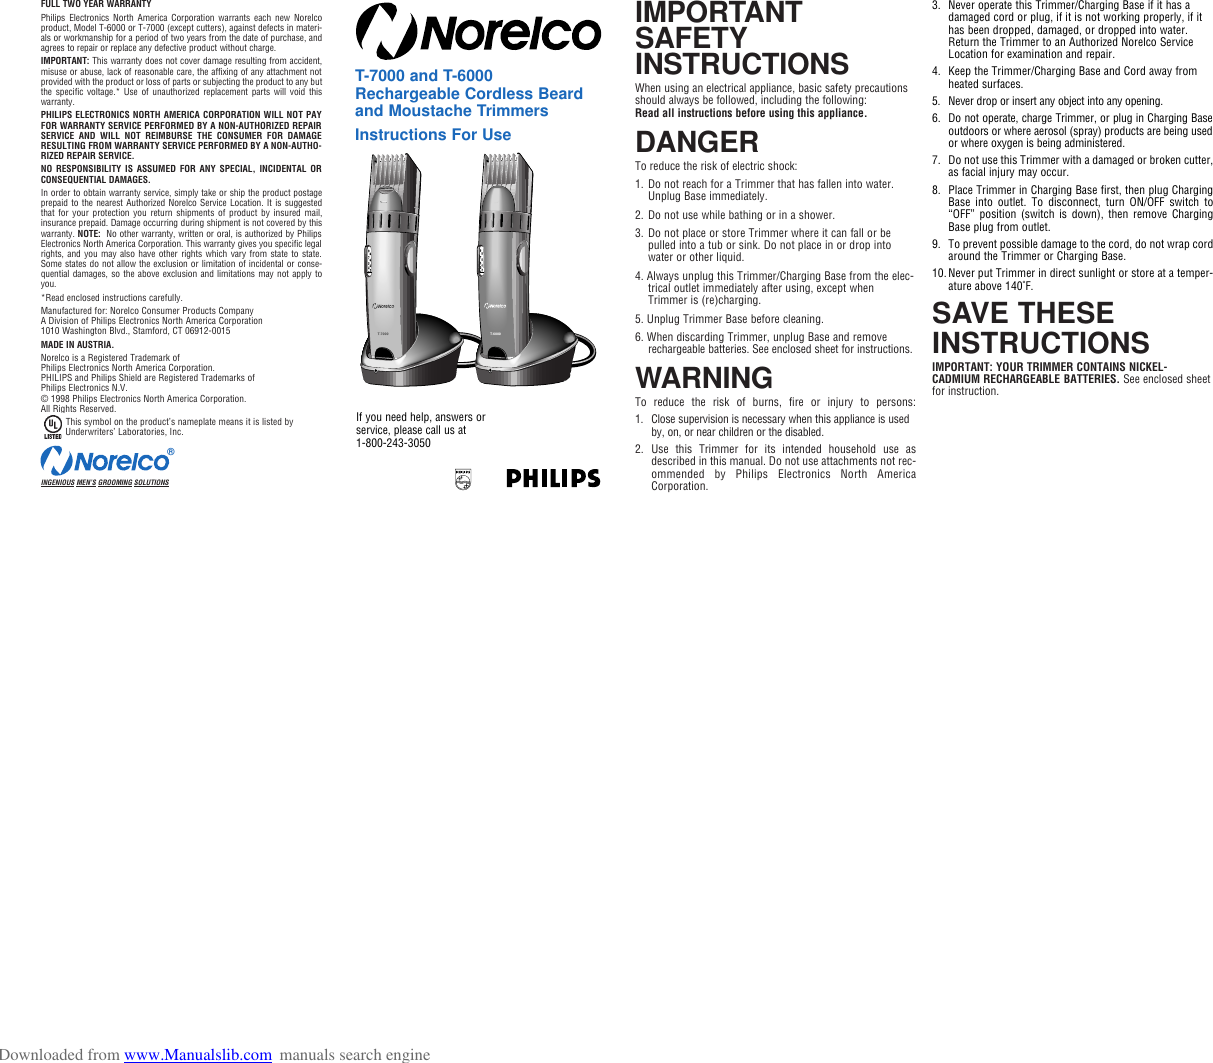 Philips Norelco Electric Shaver T 6000 Users Manual ManualsLib Makes It